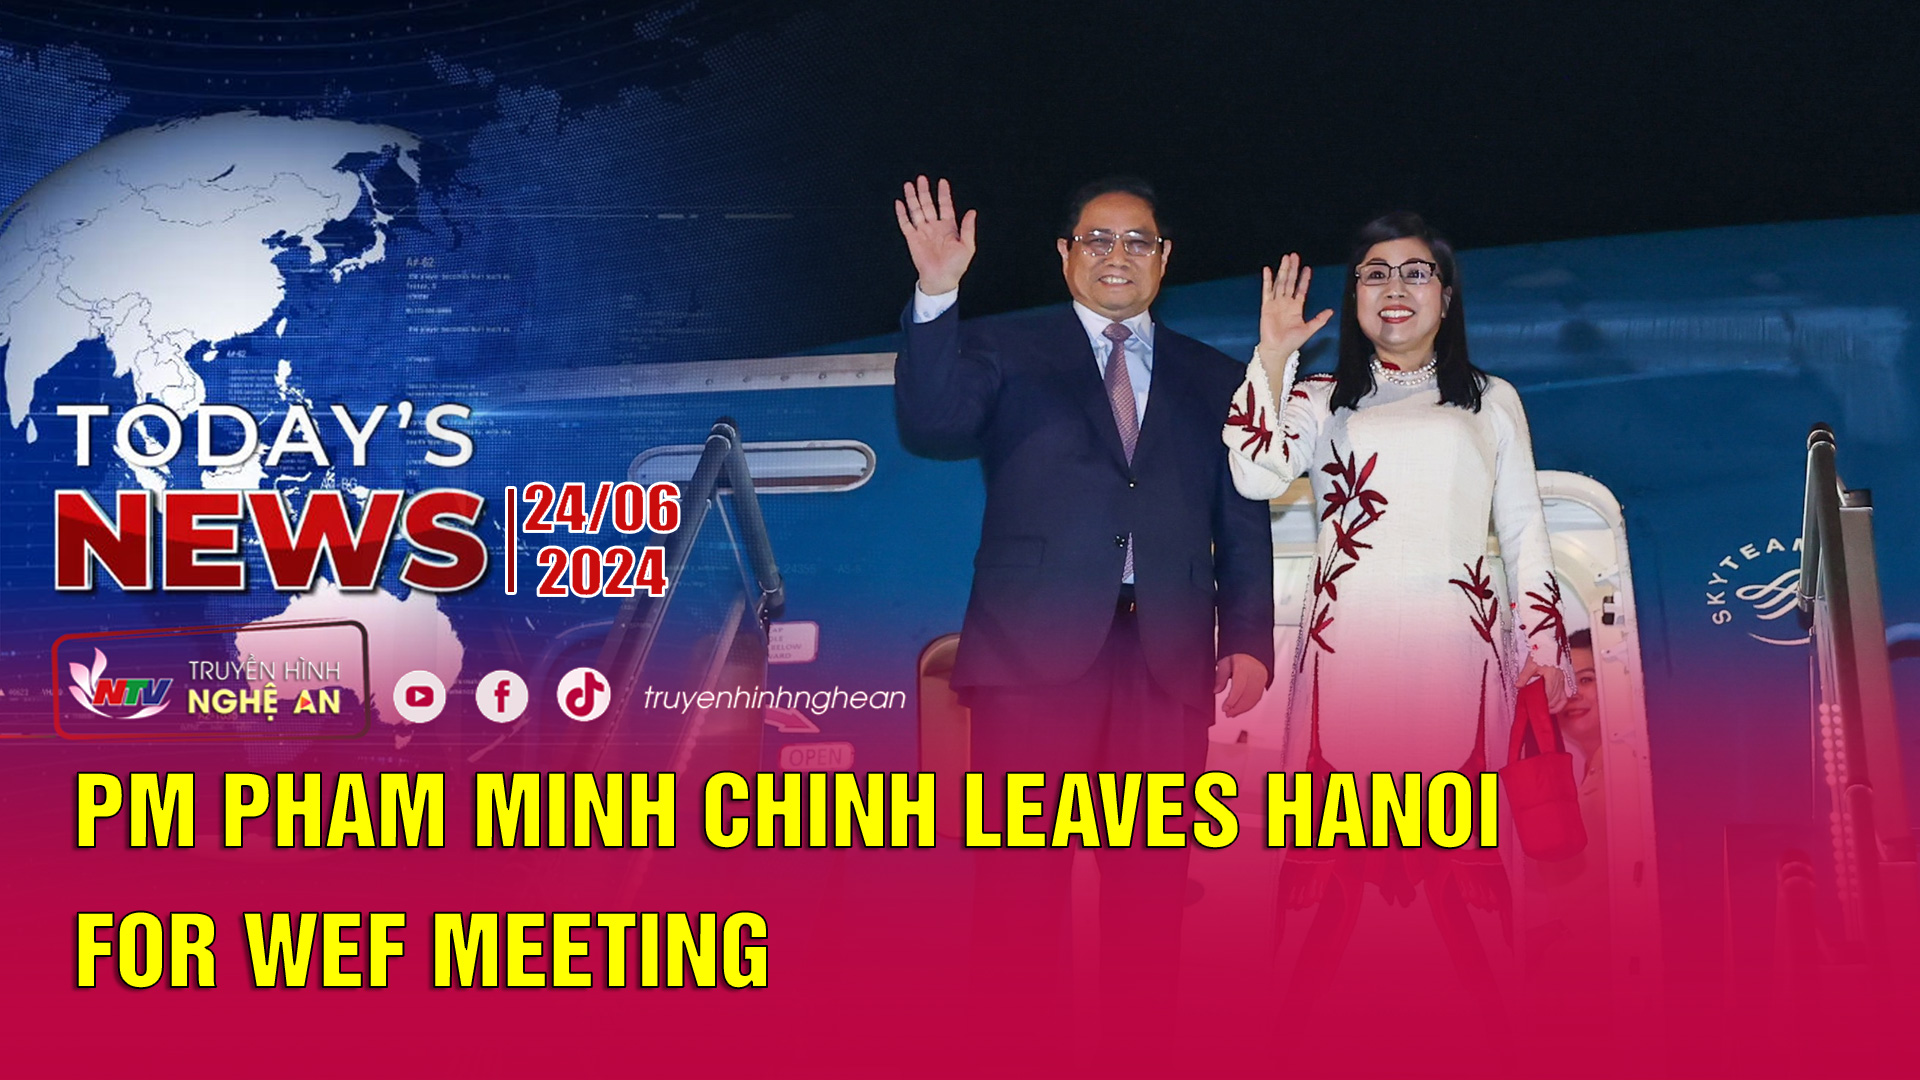 Today's News 24/6/2024: PM Pham Minh Chinh leaves Hanoi for WEF meeting